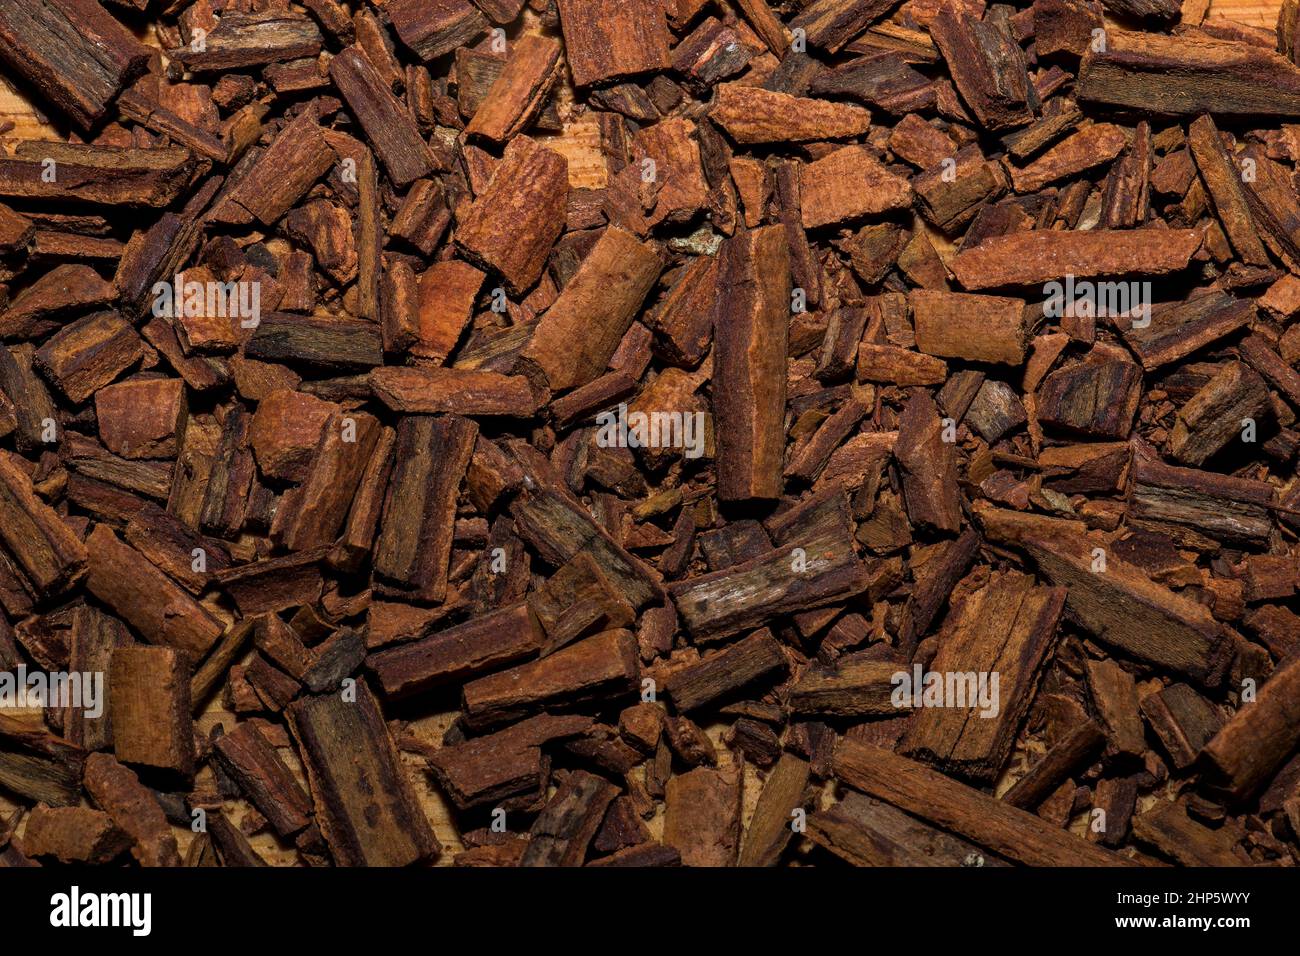 Background of crushed cinnamon sticks for making a tea mixture. Cinnamon texture. Healthy food concept. Stock Photo